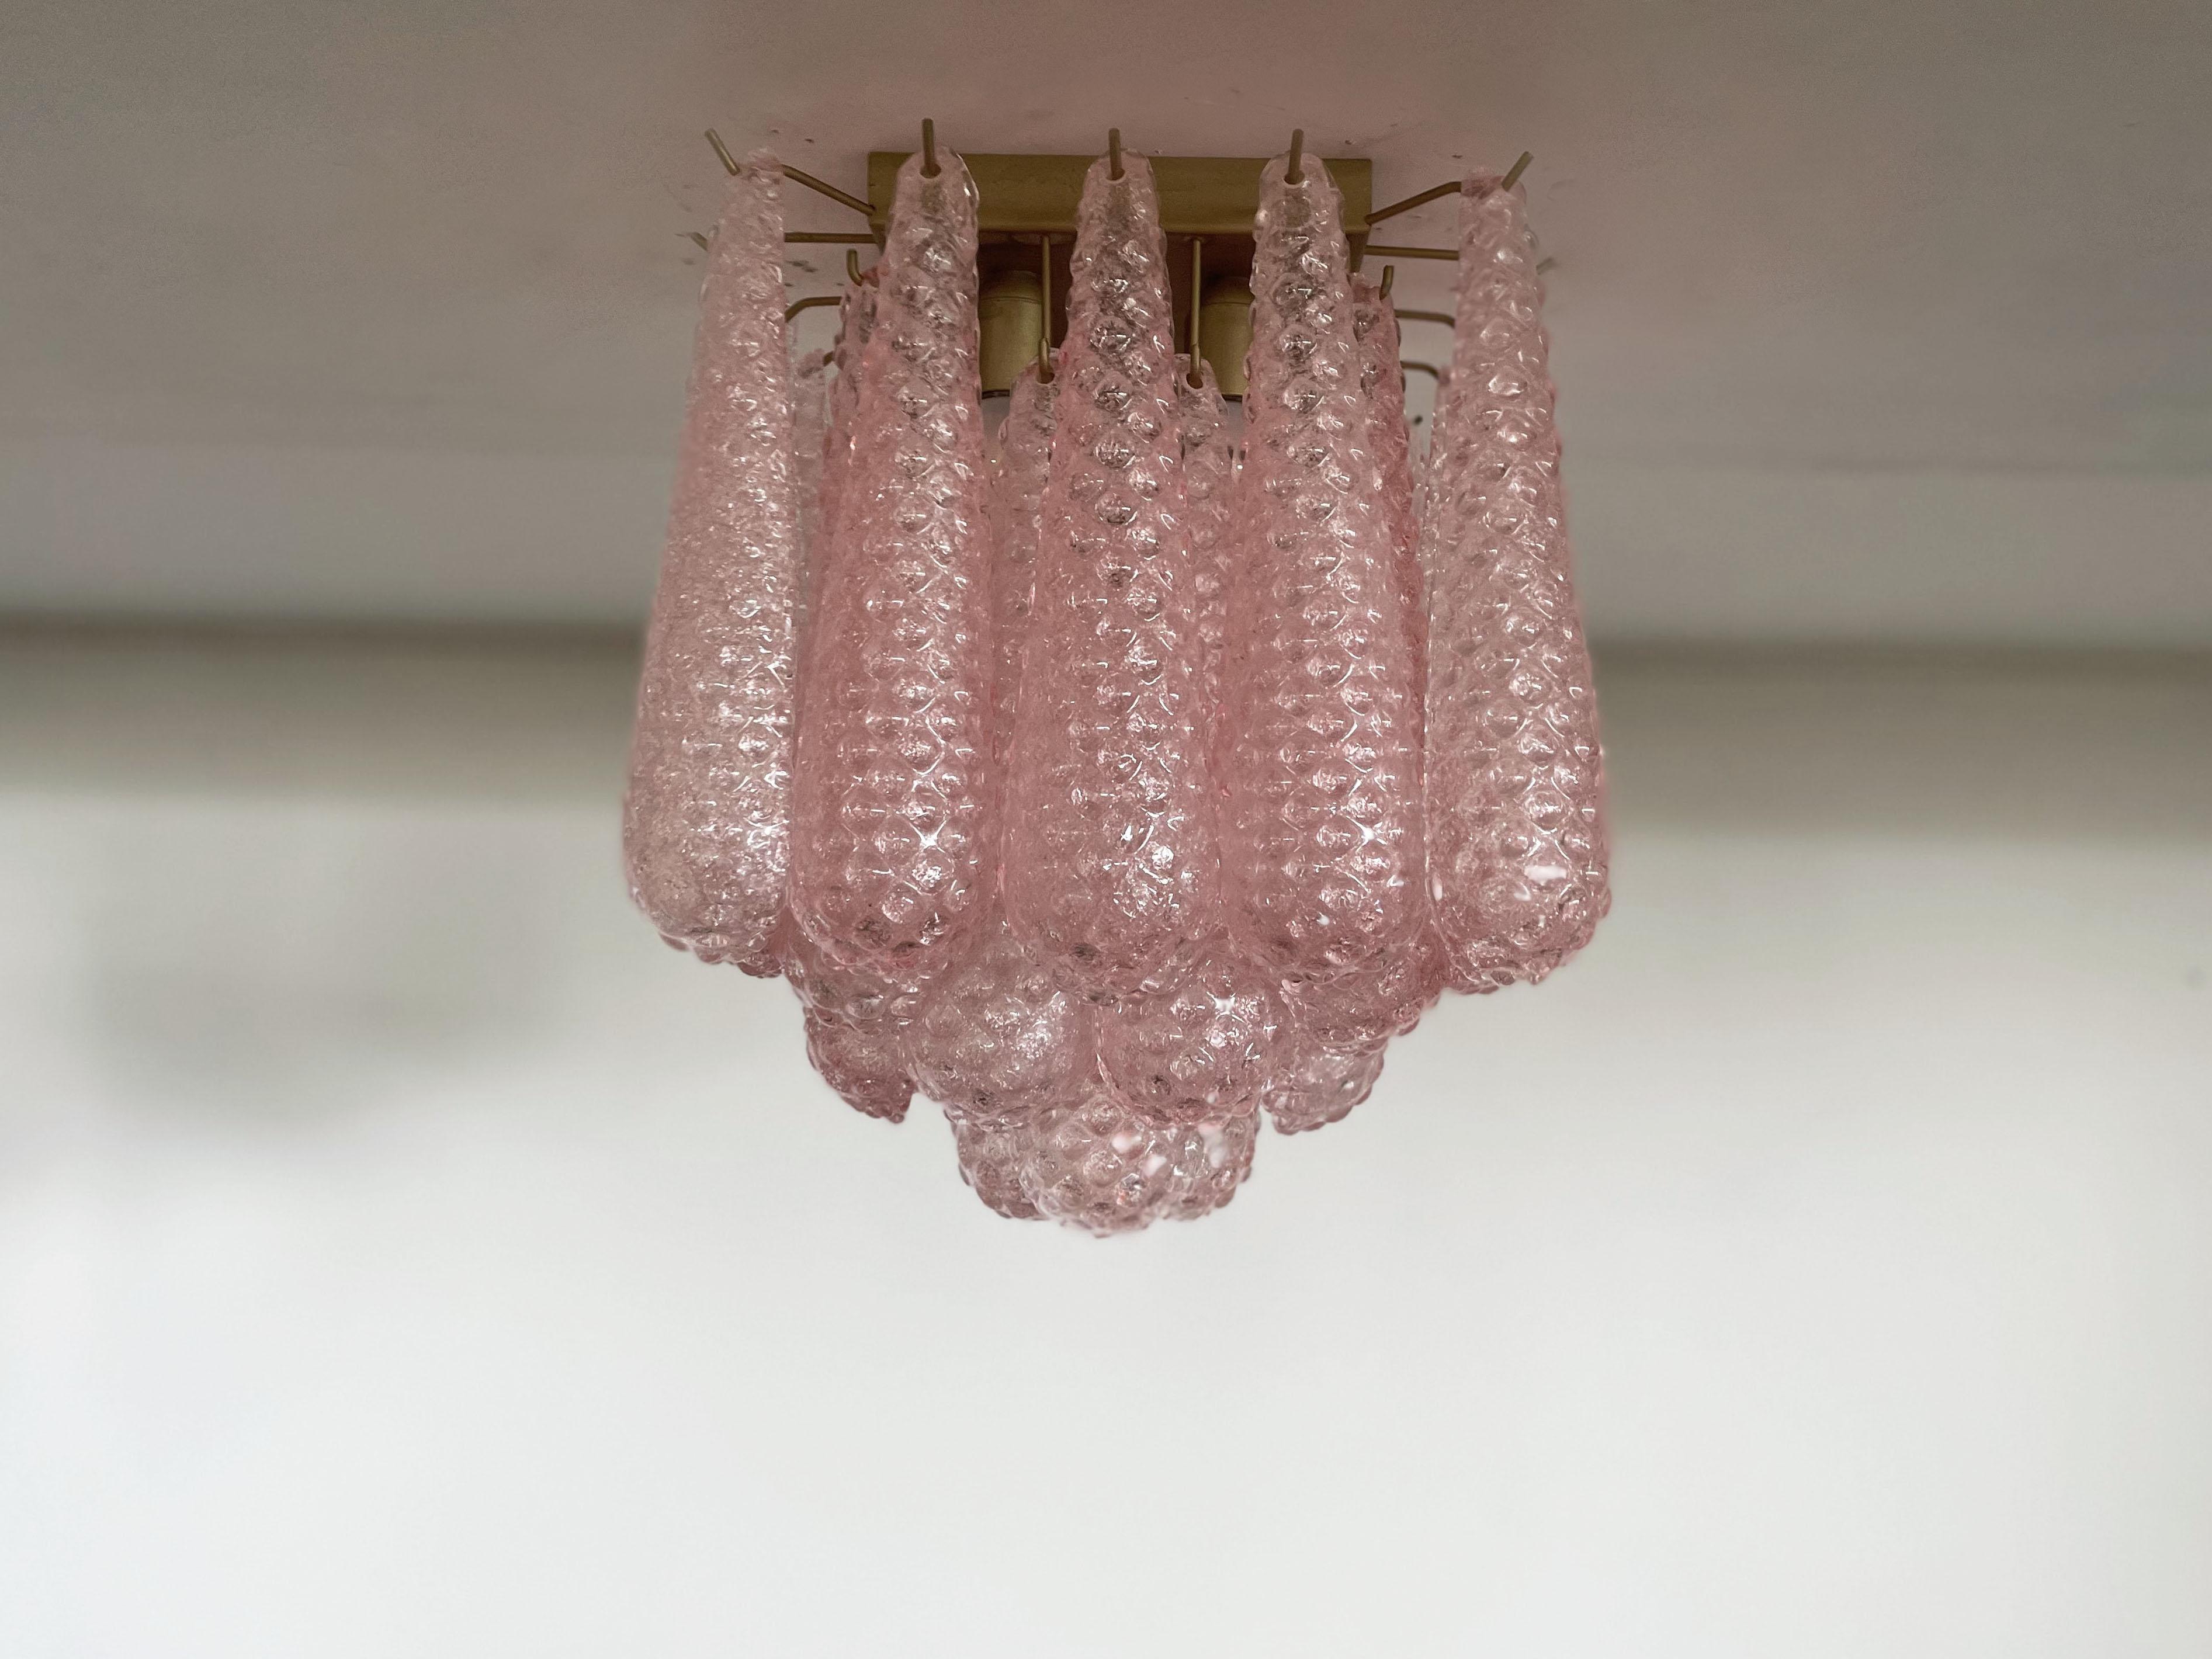 Spectacular ceiling lamp with 32  pink Murano Glasses in golden painted metal frame.  Elegant lighting object.
Period: late xx century
Dimensions: 7,45 inchs (45 cm) height; 13,55 inches (35 cm) depth; 13,55 inches (35 cm) depth.
Dimension glasses: